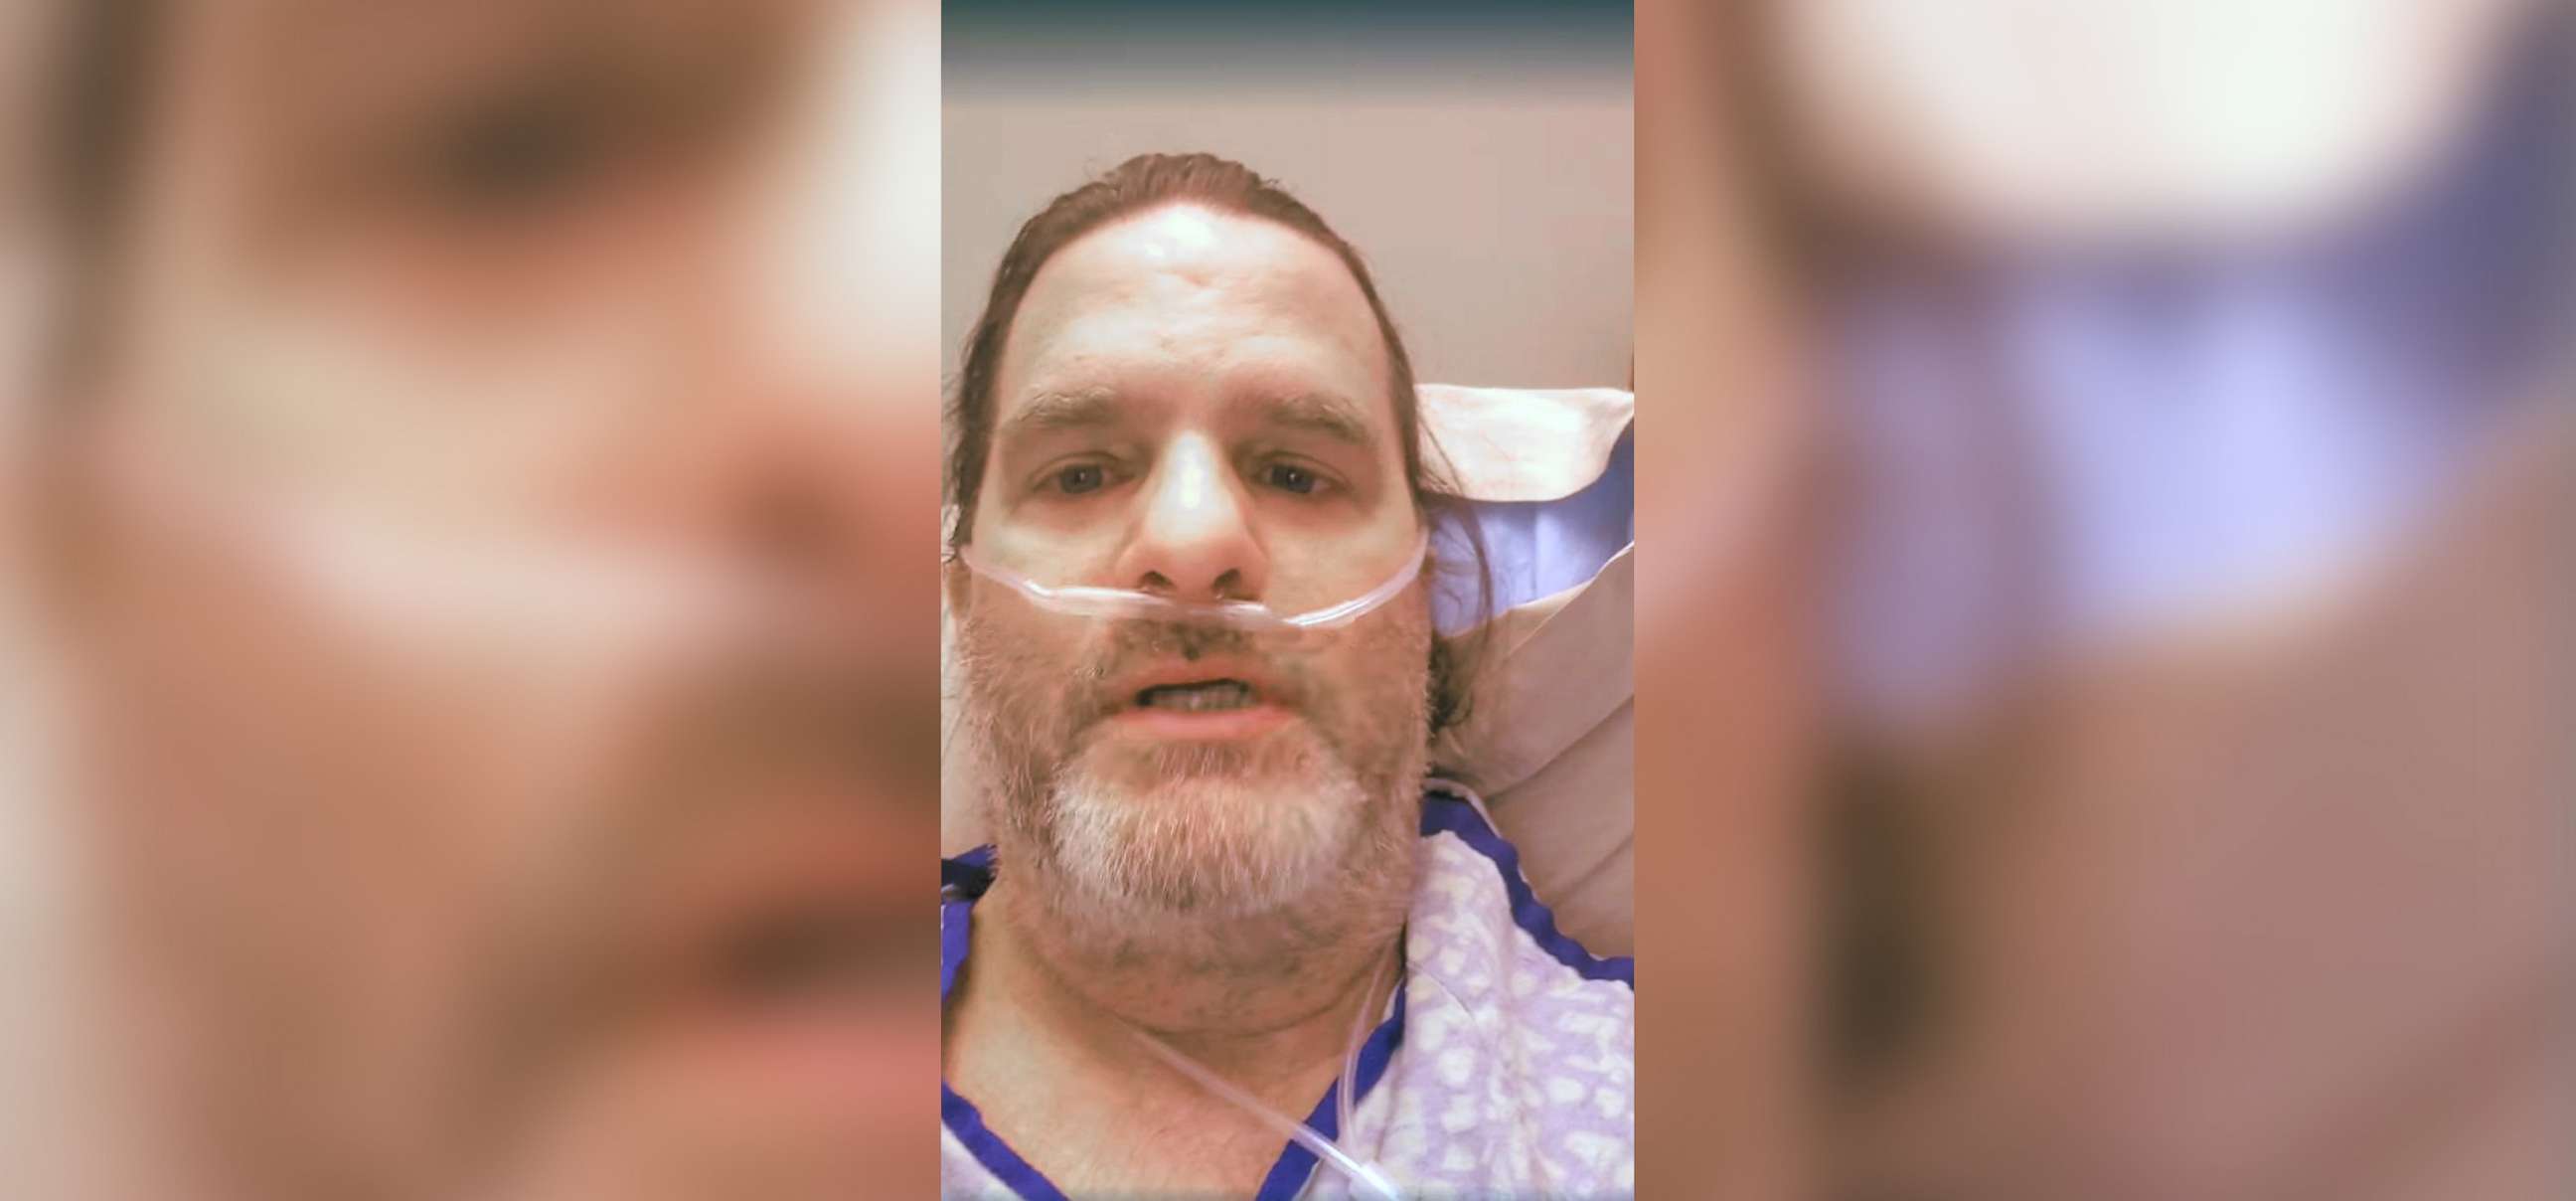 PHOTO: Unvaccinated New Orleans resident Steve Witschel was in intensive care with COVID-19. He is pictured in an image taken from video posted to his Facebook account.